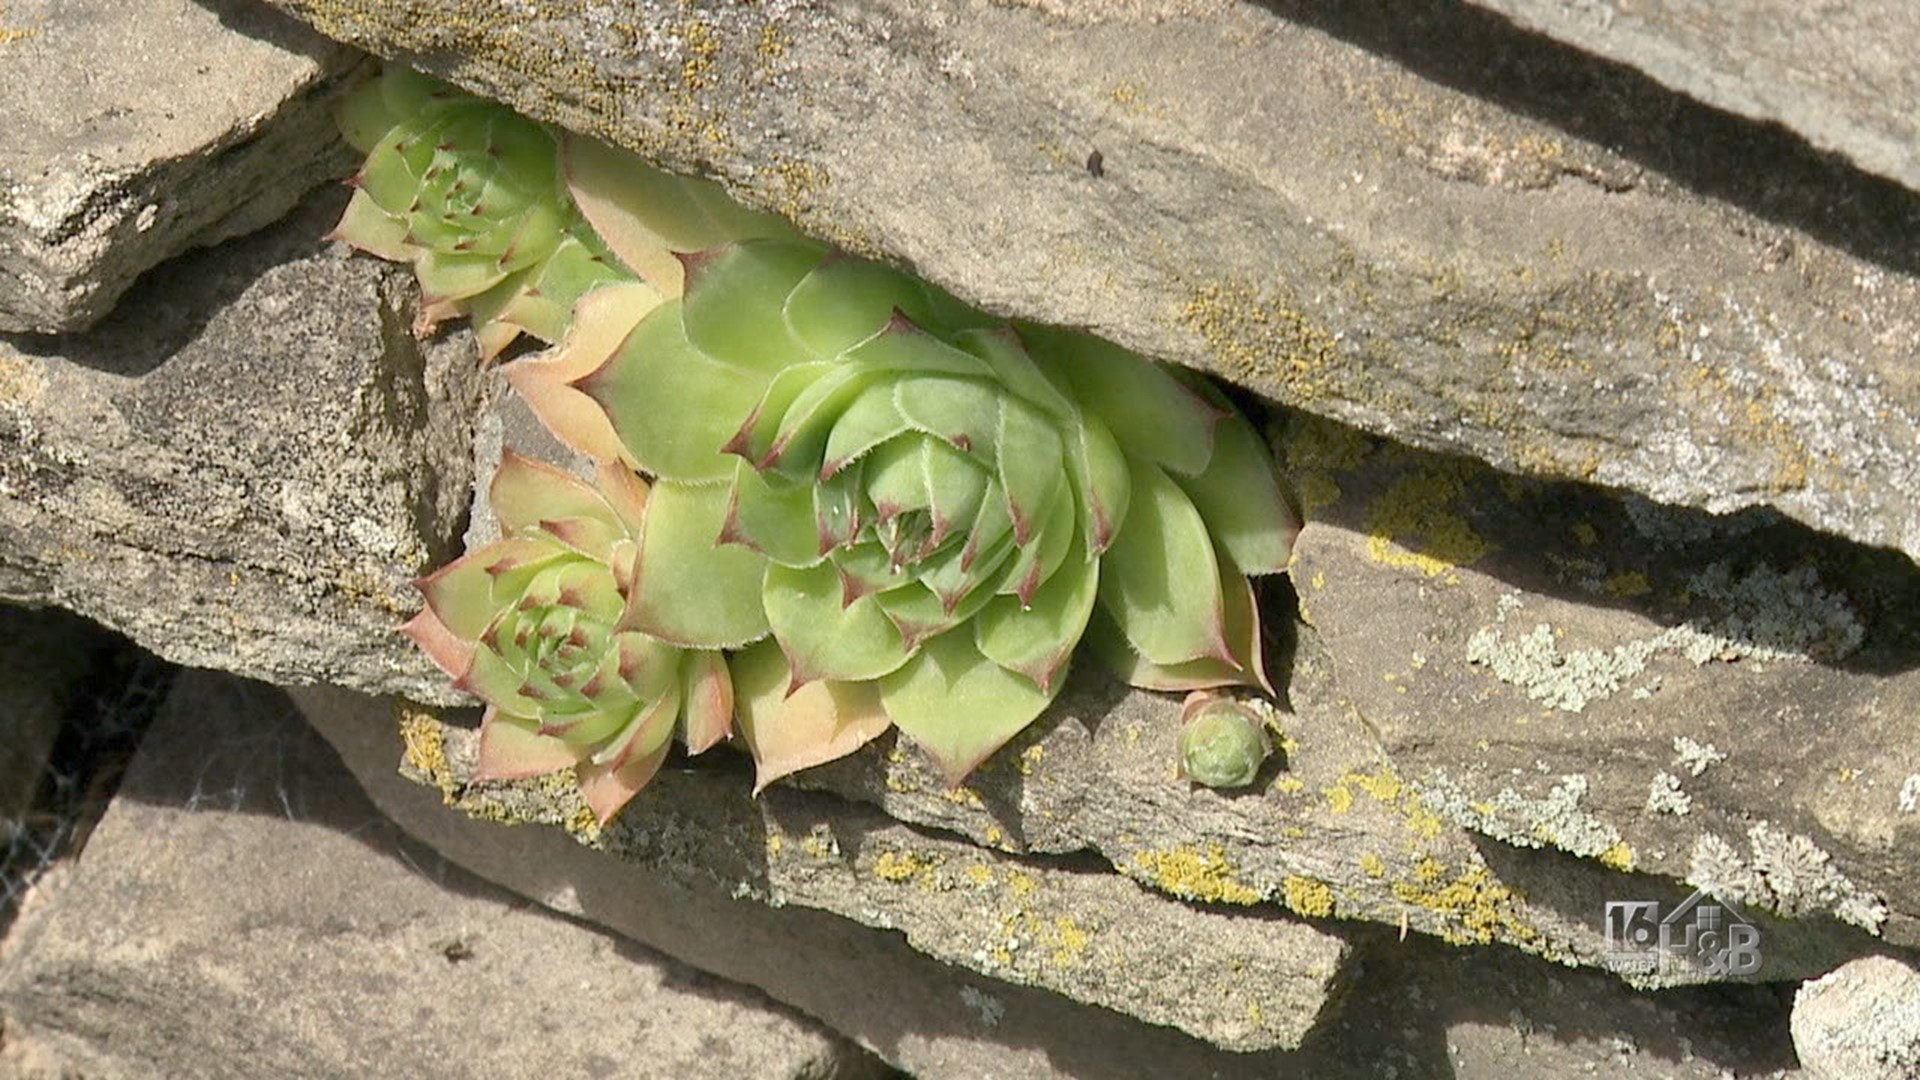 Finding Hens And Chicks In Unusual Places